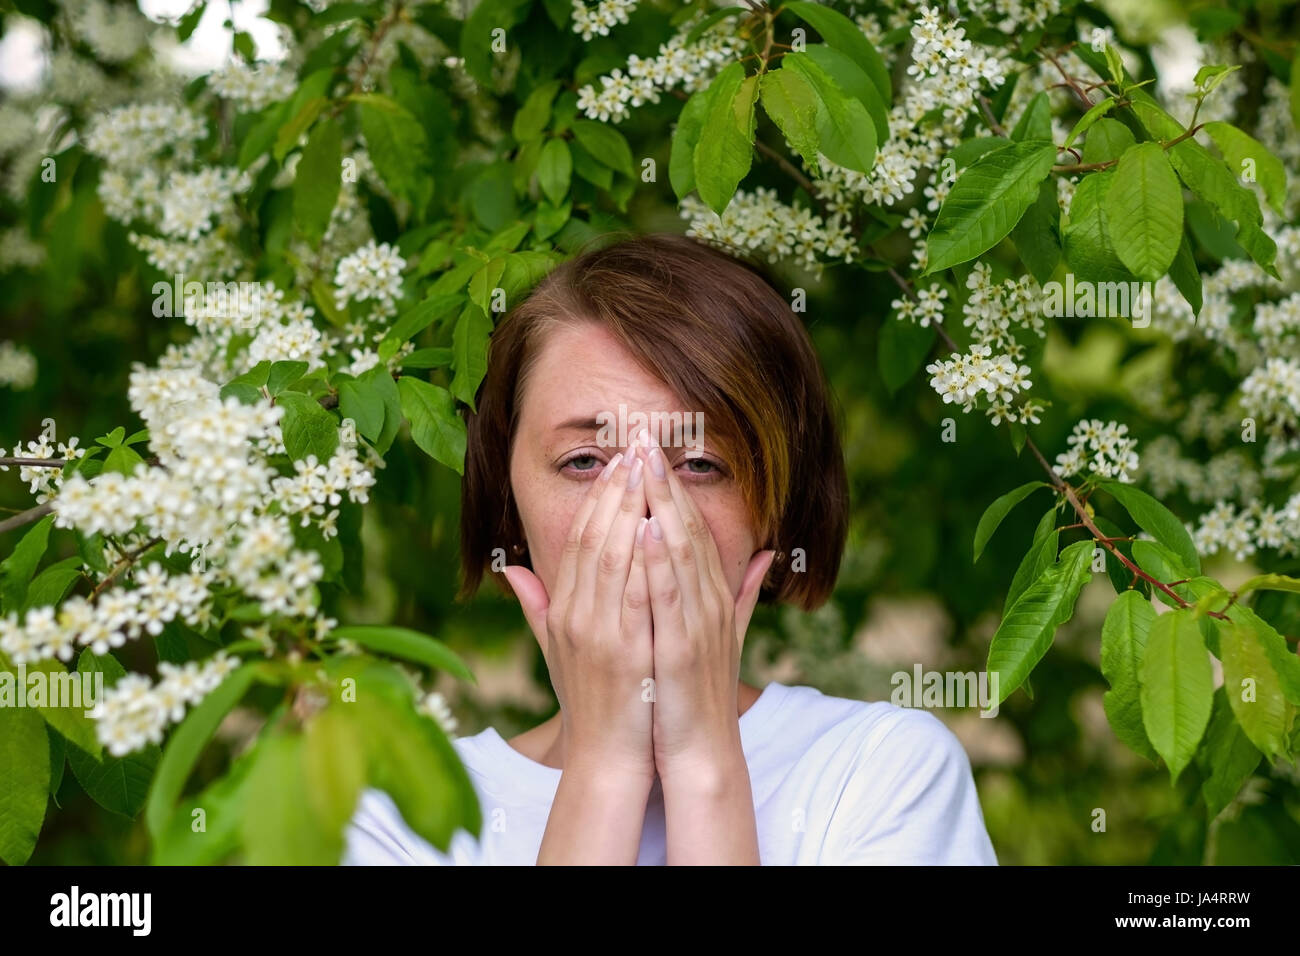 A beautiful girl stands by the blossoming bird cherry and sneezes. She suffers from an allergy to flowering in the spring. Stock Photo